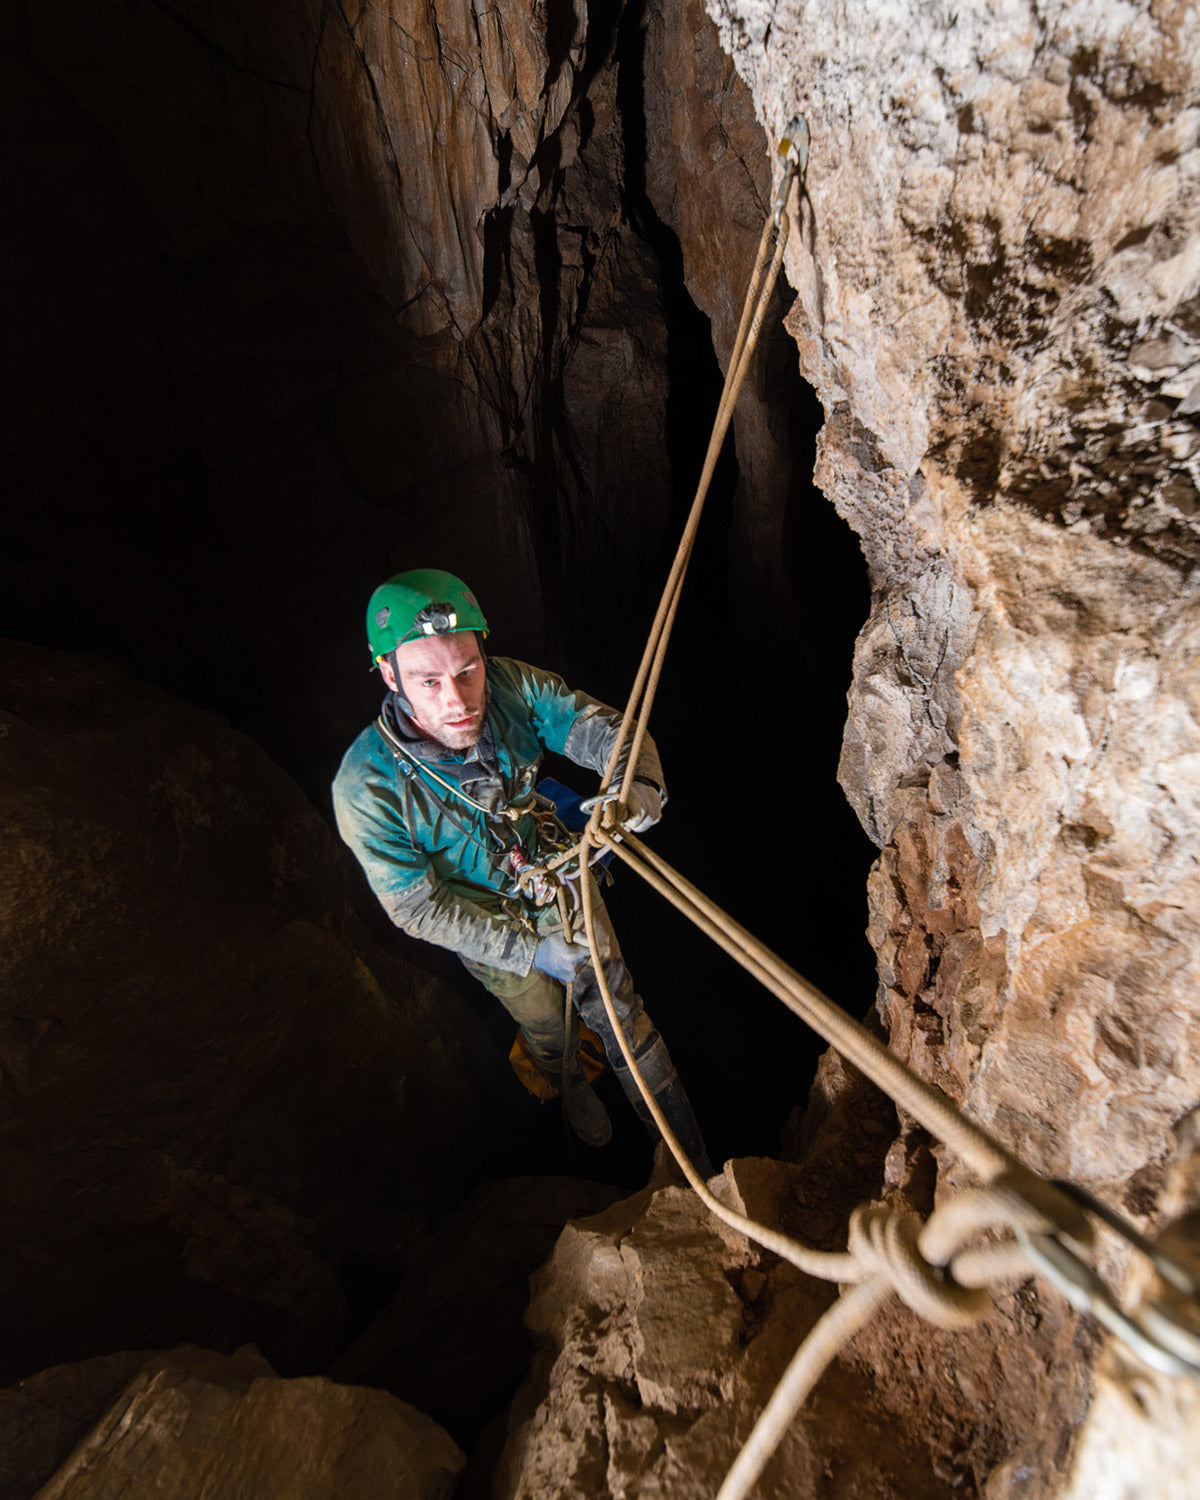 Caver rigging ropes as he descends